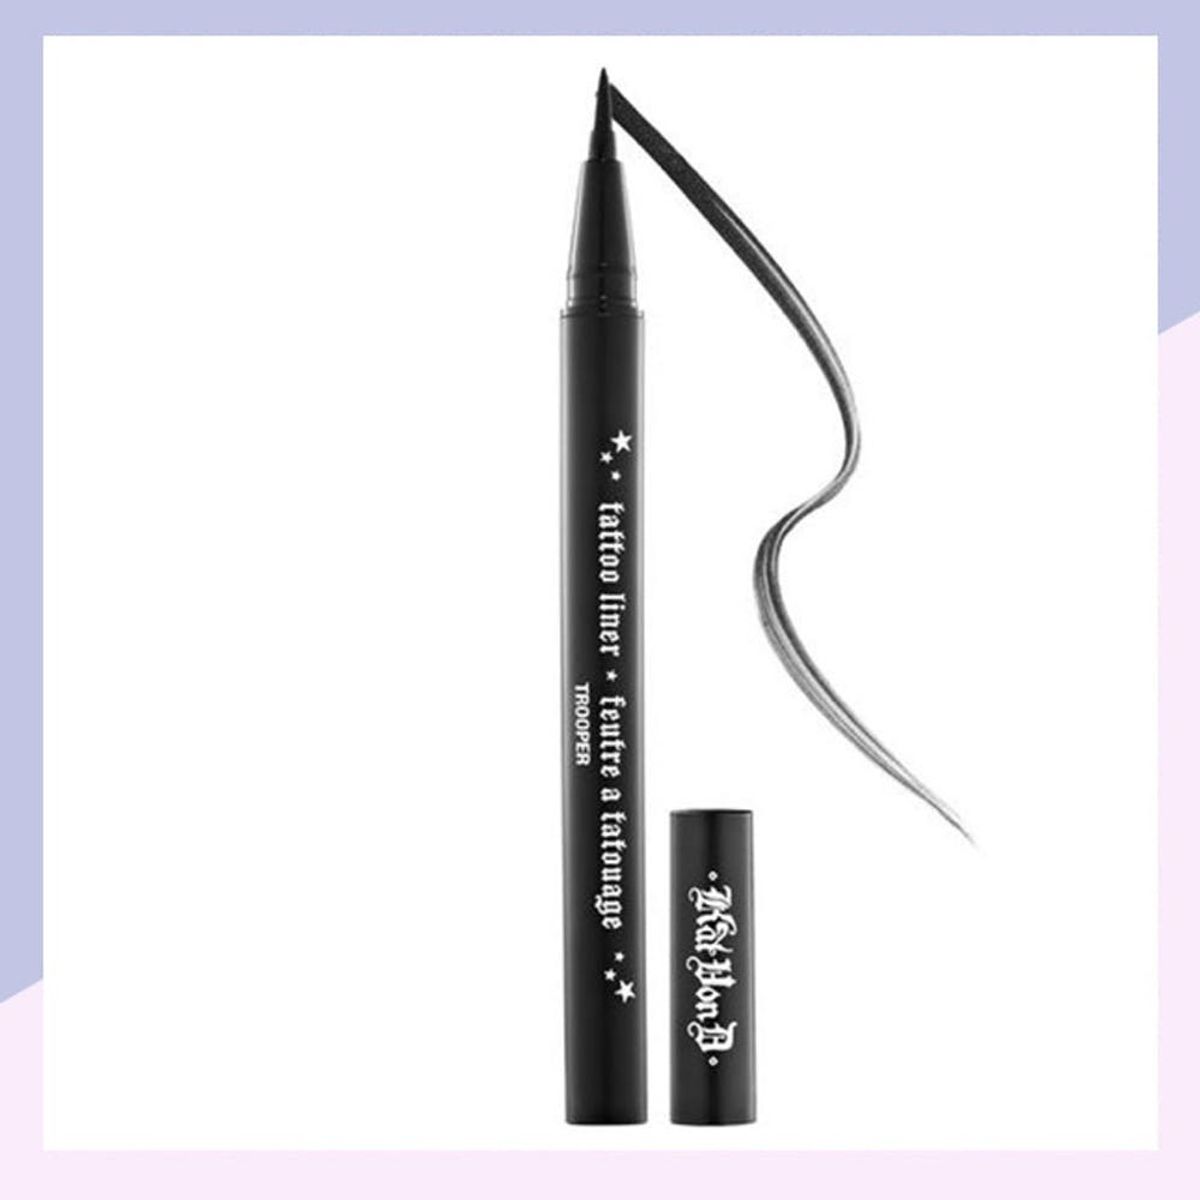 5 Beauty Products and Tools You’ll Need to Master the Perfect Cat Eye